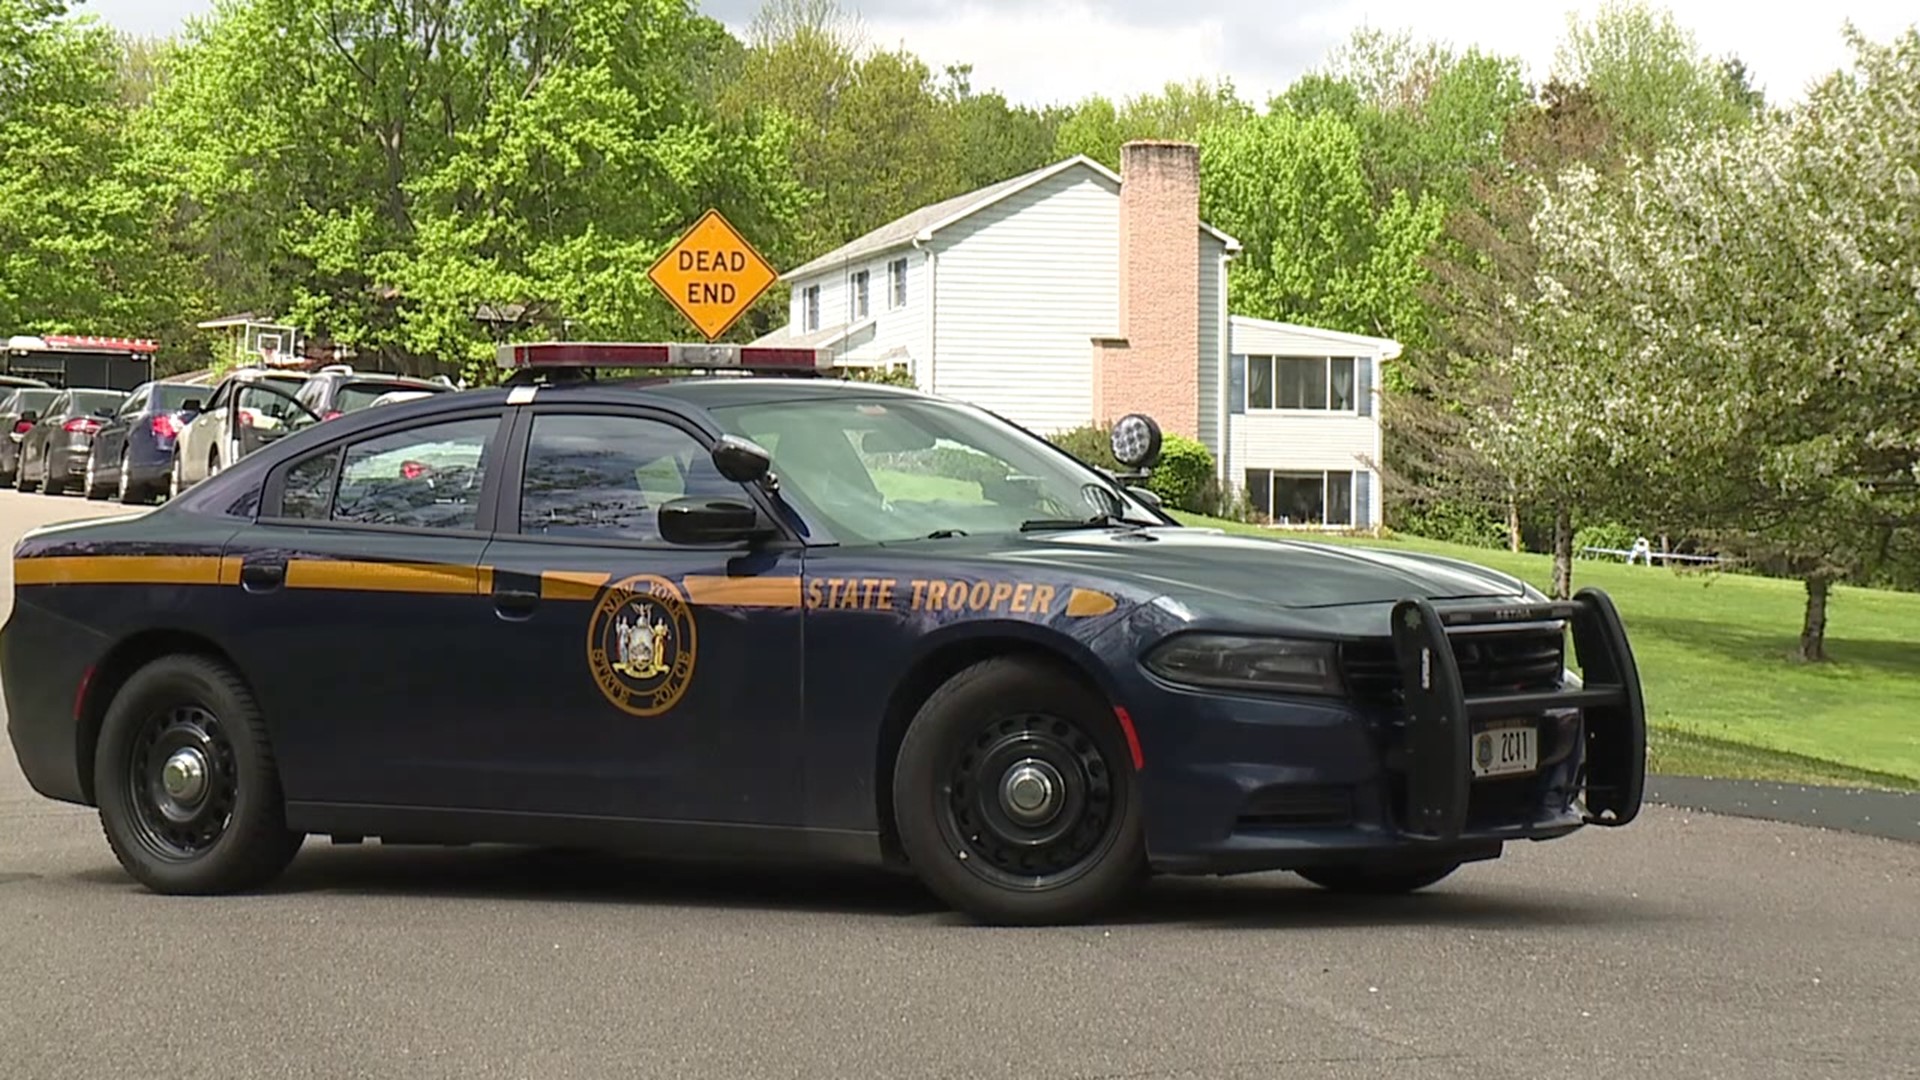 A heavy police presence continues Sunday evening at a home associated with the alleged shooter located in Conklin, New York.